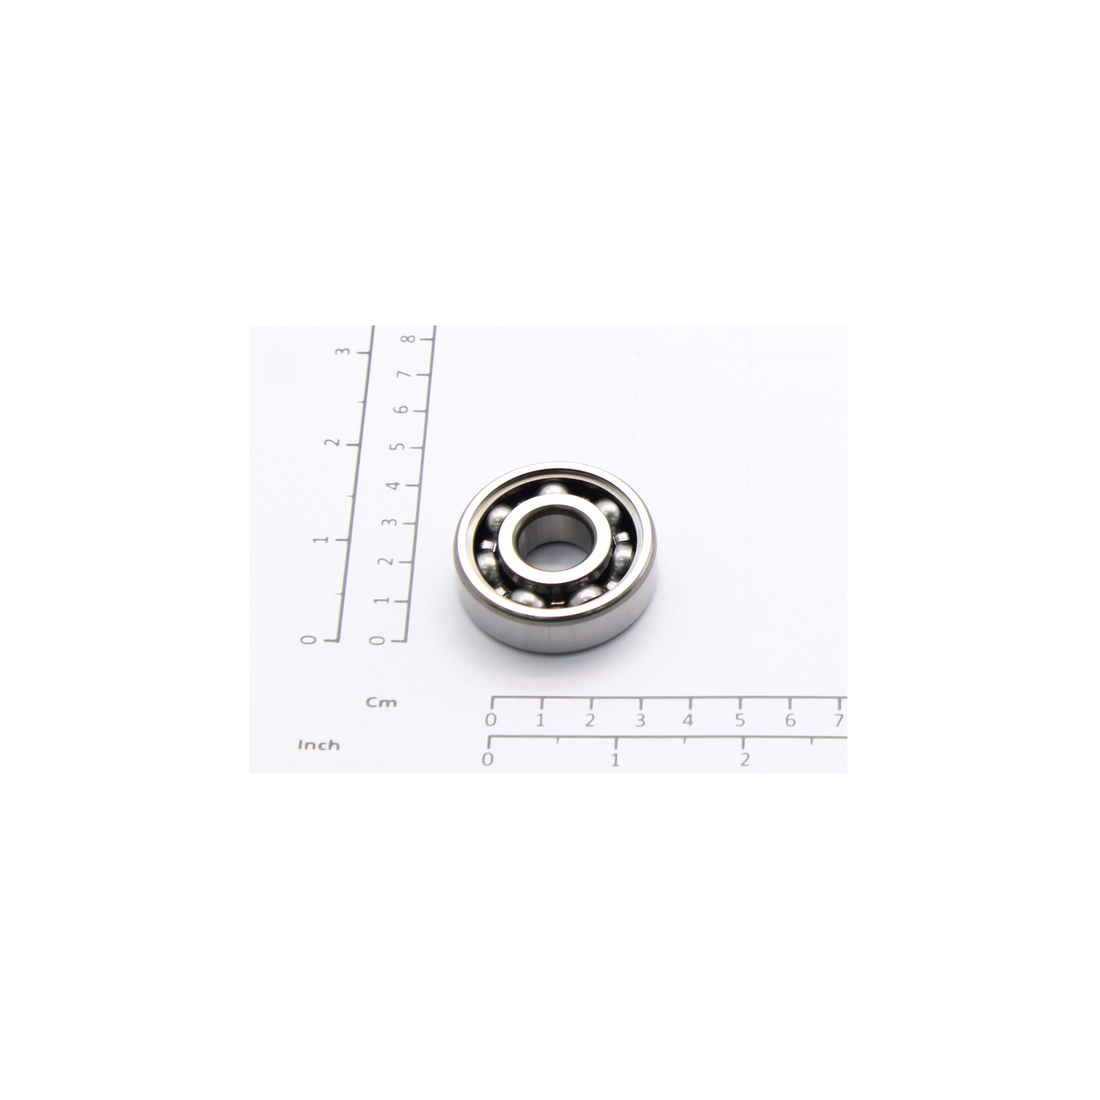 R&M Parts - Deep Groove Ball Bearing, Part Number: 52274500